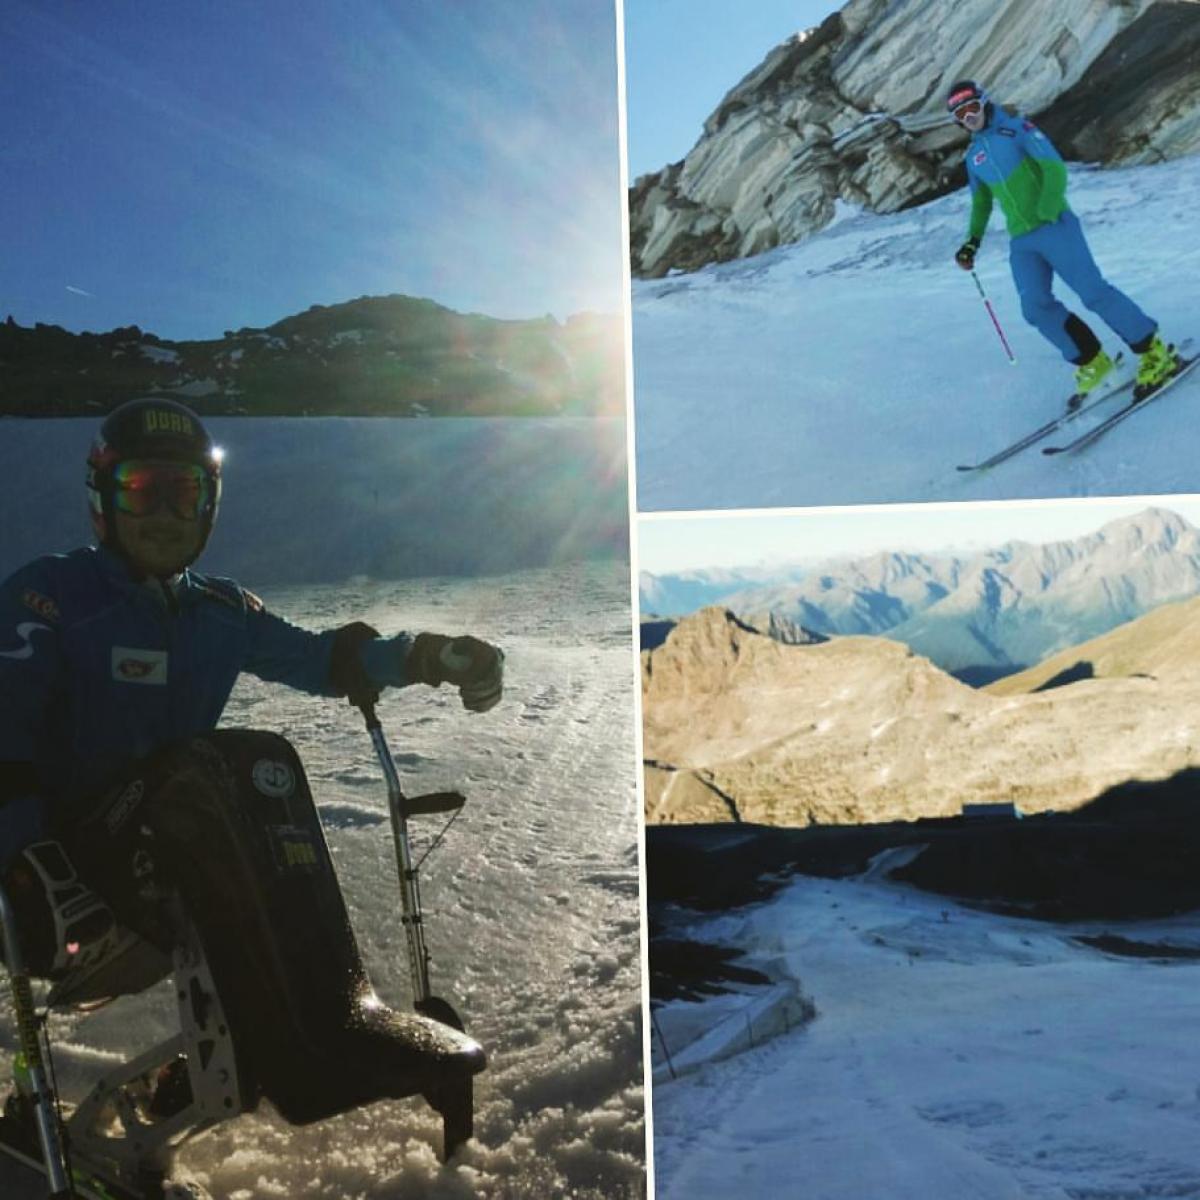 Collage of photos taken on snow, with two skiers (one in sit ski)